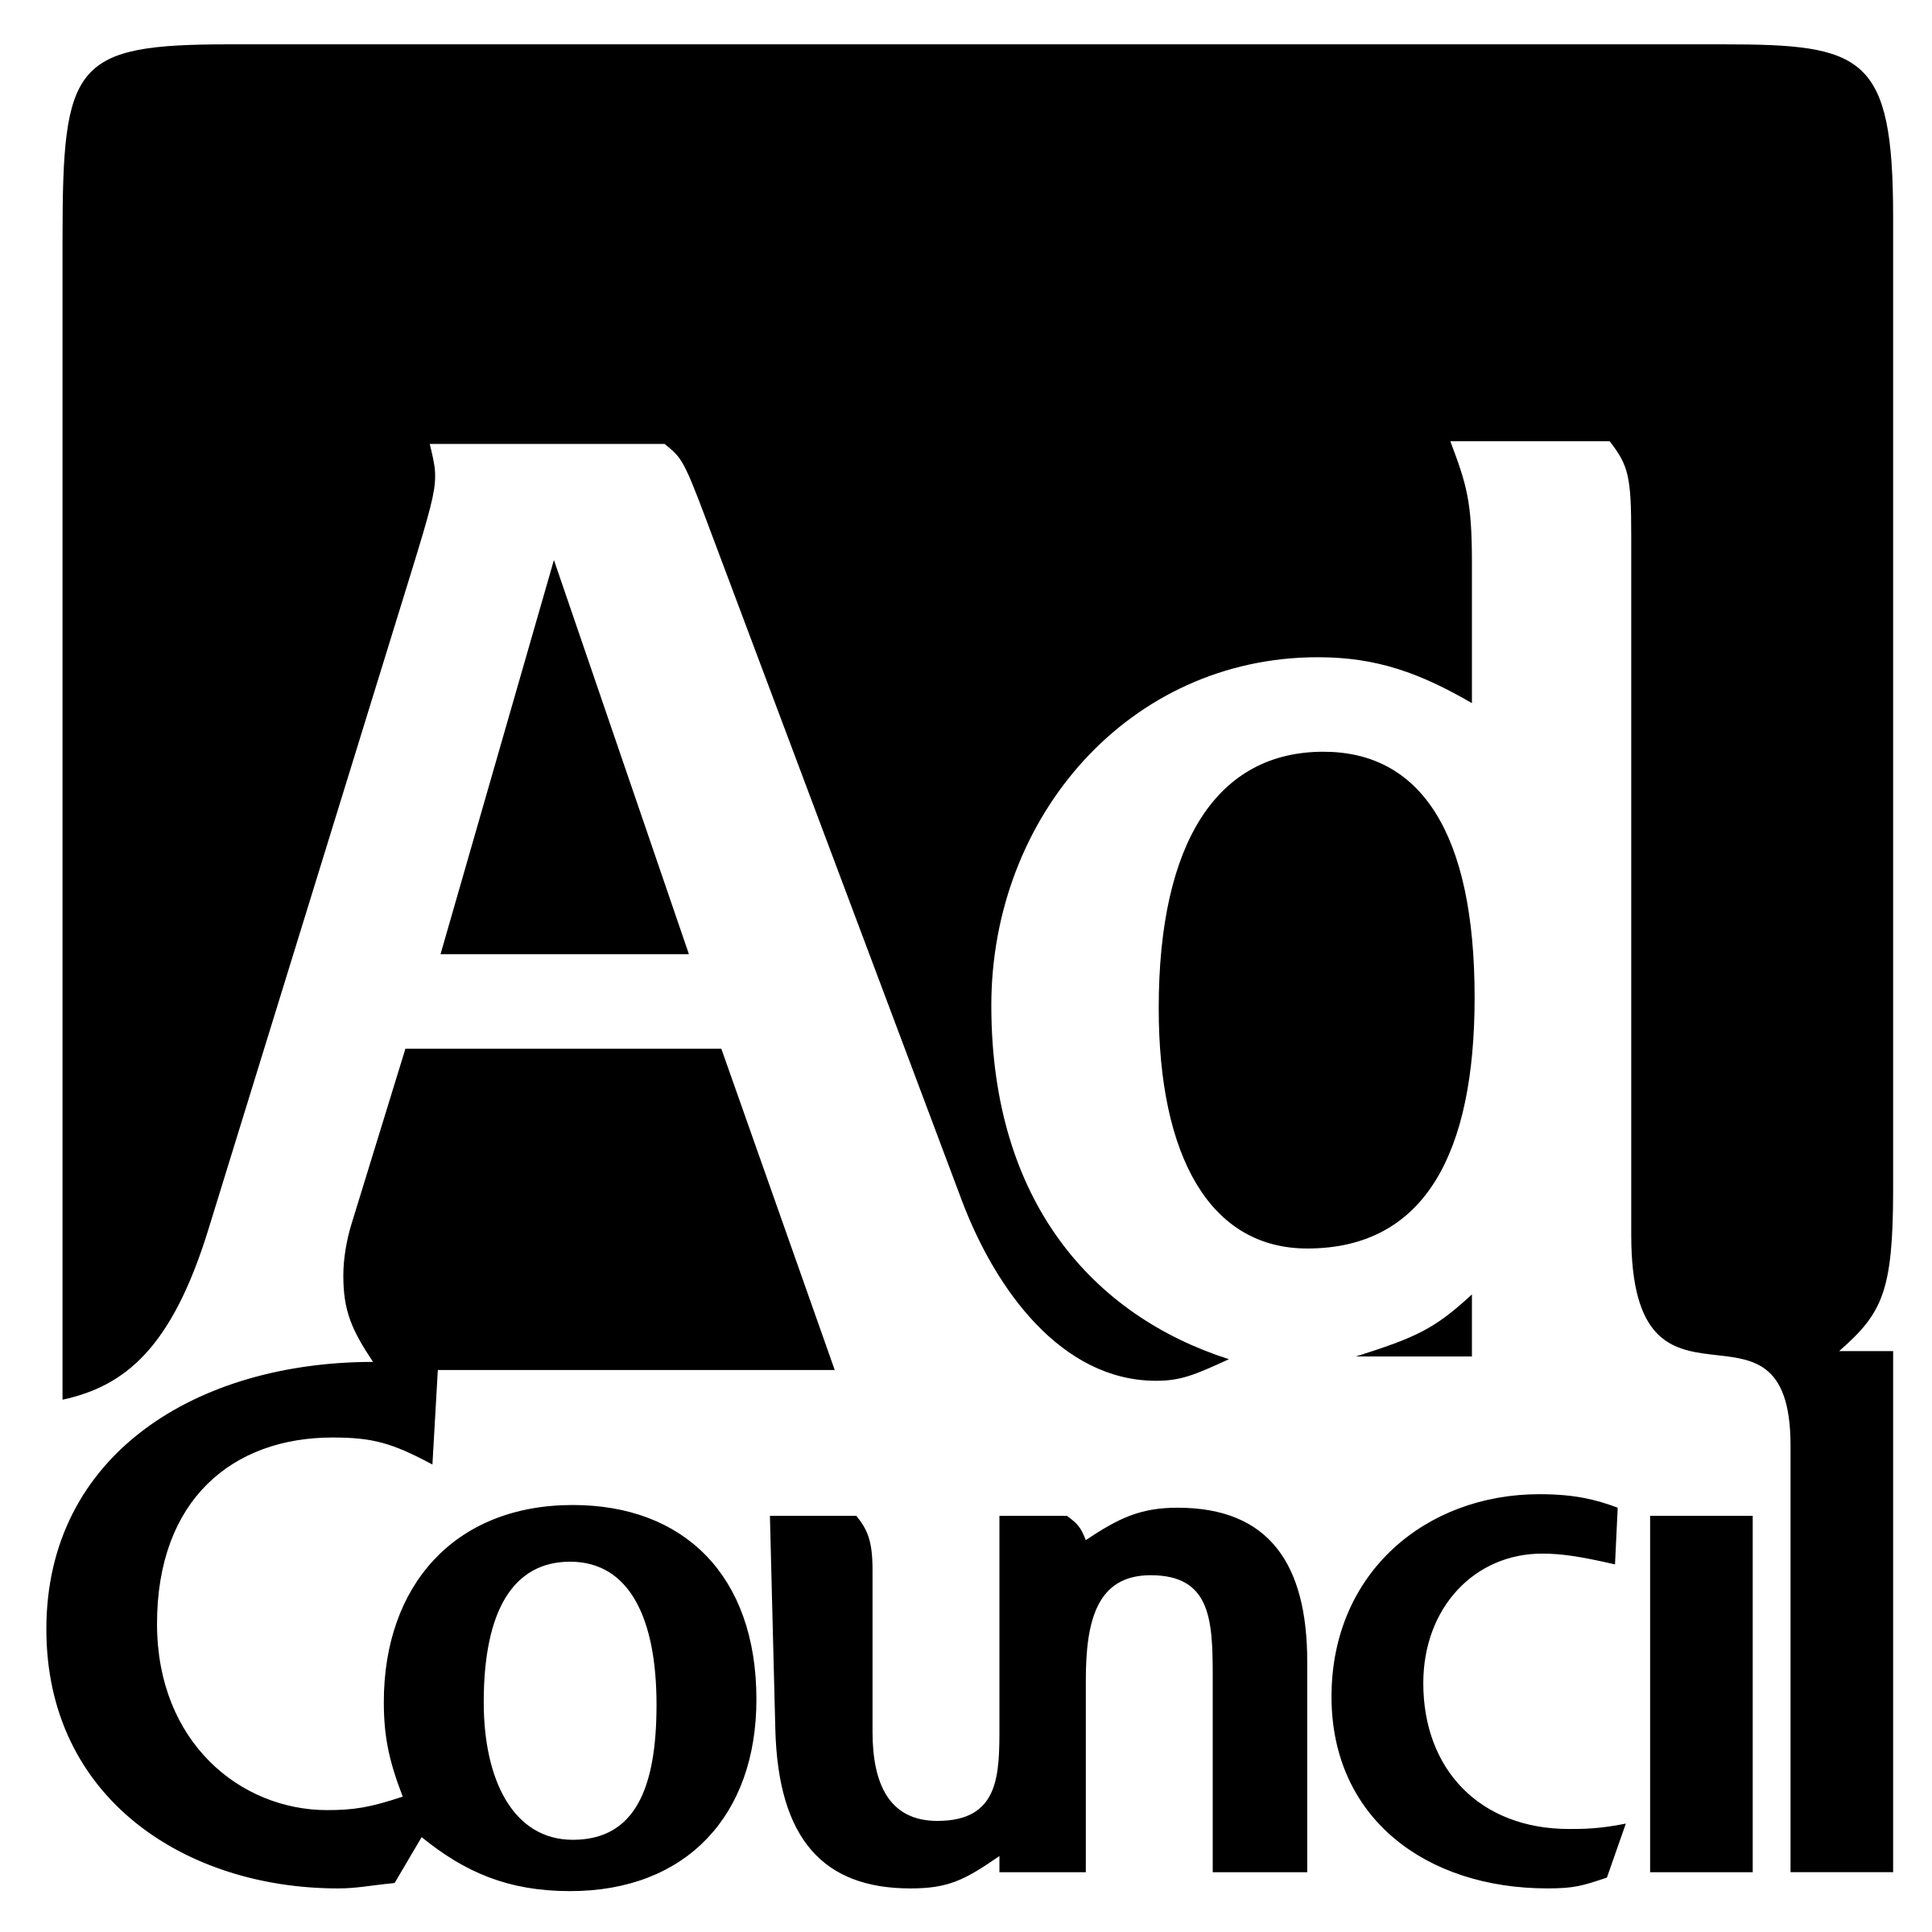 ad-council-1-logo-black-and-white.png